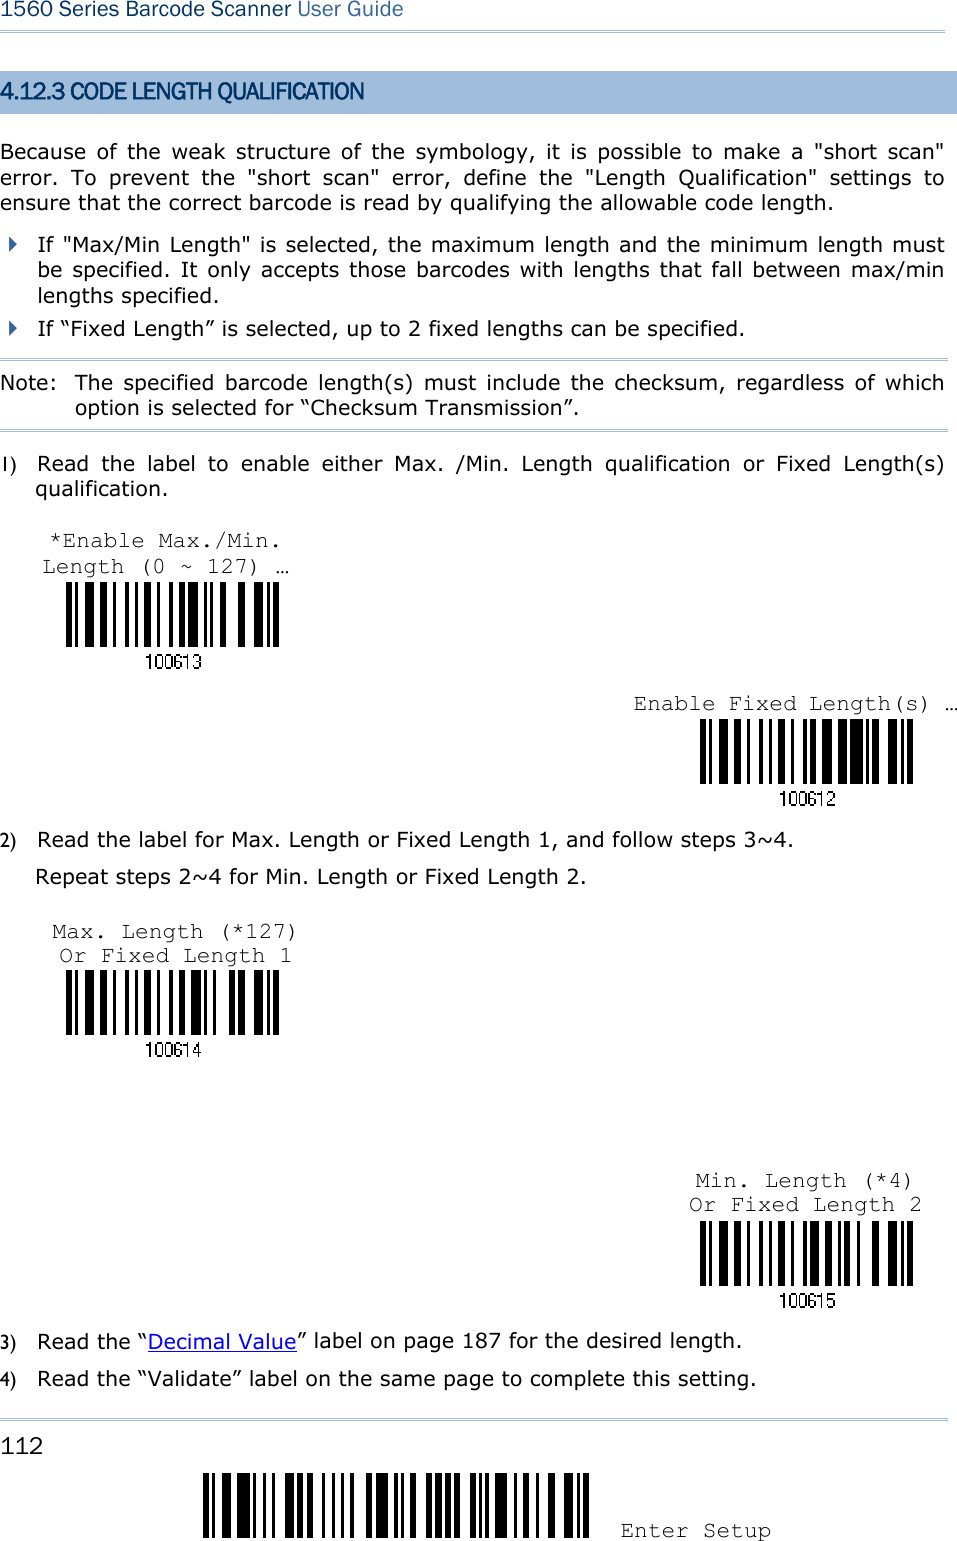 112 Enter Setup 1560 Series Barcode Scanner User Guide  4.12.3 CODE LENGTH QUALIFICATION Because of the weak structure of the symbology, it is possible to make a &quot;short scan&quot; error. To prevent the &quot;short scan&quot; error, define the &quot;Length Qualification&quot; settings to ensure that the correct barcode is read by qualifying the allowable code length.    If &quot;Max/Min Length&quot; is selected, the maximum length and the minimum length must be specified. It only accepts those barcodes with lengths that fall between max/min lengths specified.  If “Fixed Length” is selected, up to 2 fixed lengths can be specified. Note:   The specified barcode length(s) must include the checksum, regardless of which option is selected for “Checksum Transmission”. 1) Read the label to enable either Max. /Min. Length qualification or Fixed Length(s) qualification.    2) Read the label for Max. Length or Fixed Length 1, and follow steps 3~4. Repeat steps 2~4 for Min. Length or Fixed Length 2.       3) Read the “Decimal Value” label on page 187 for the desired length.   4) Read the “Validate” label on the same page to complete this setting. Enable Fixed Length(s) …*Enable Max./Min. Length (0 ~ 127) … Min. Length (*4) Or Fixed Length 2 Max. Length (*127) Or Fixed Length 1 